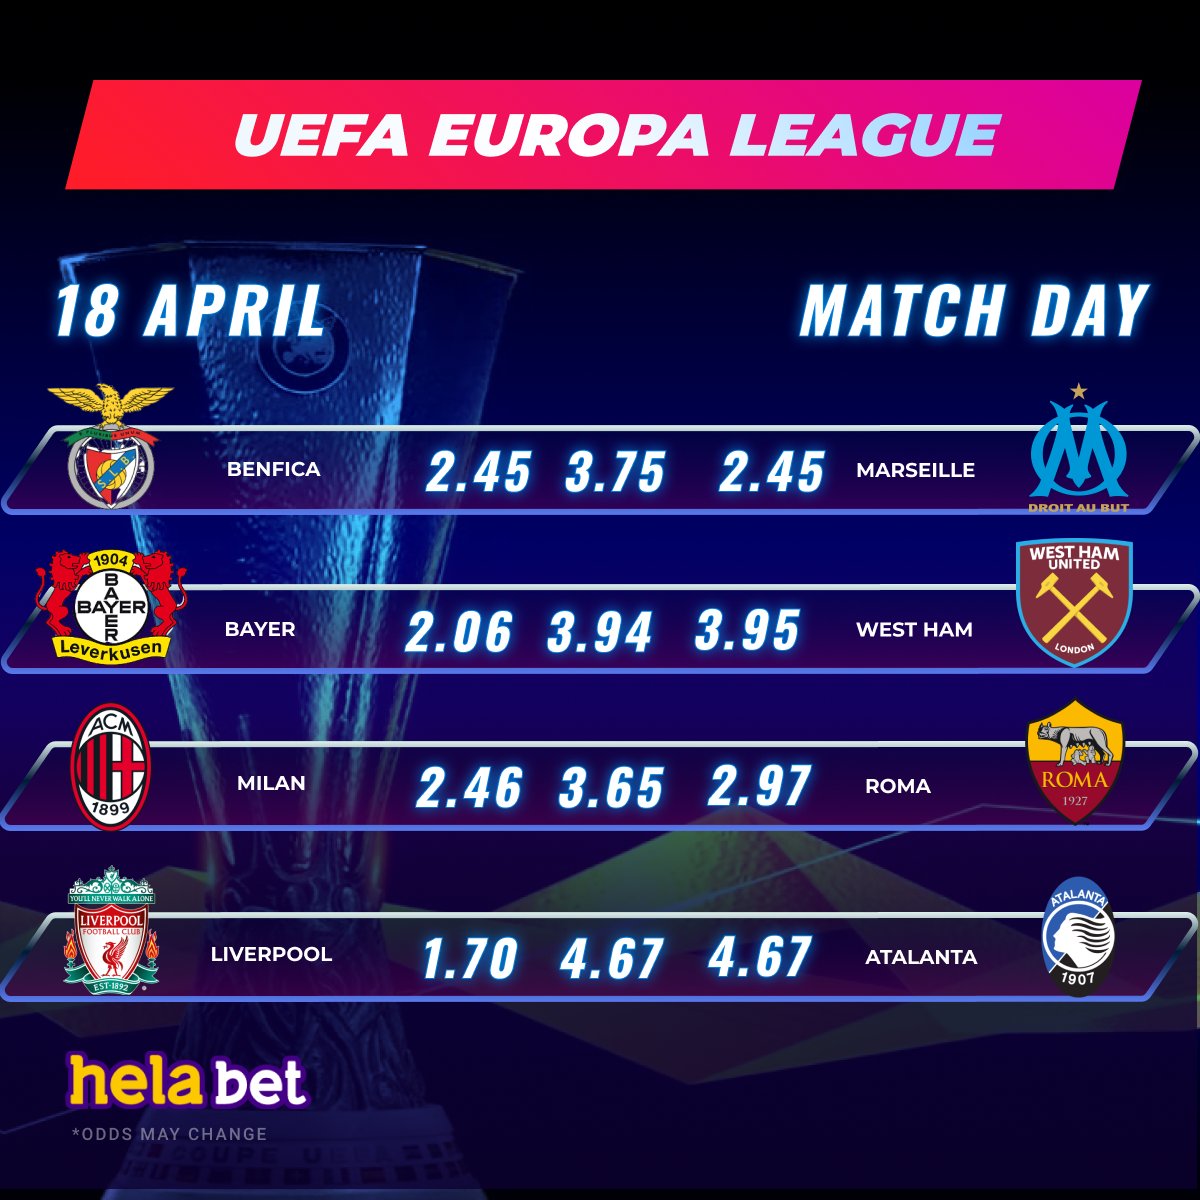 🔥 UEFA EUROPA LEAUGUE 🔥 ⚽ #Benfica VS #Marseille ⚽ #Bayer 04 Leverkusen VS #WestHam ⚽ #Milan VS #Roma ⚽ #Liverpool VS  #Atalanta 👉 Best odds on the matches in #helabet 👉 cutt.ly/UwY8h1uG #uefa #europaleague